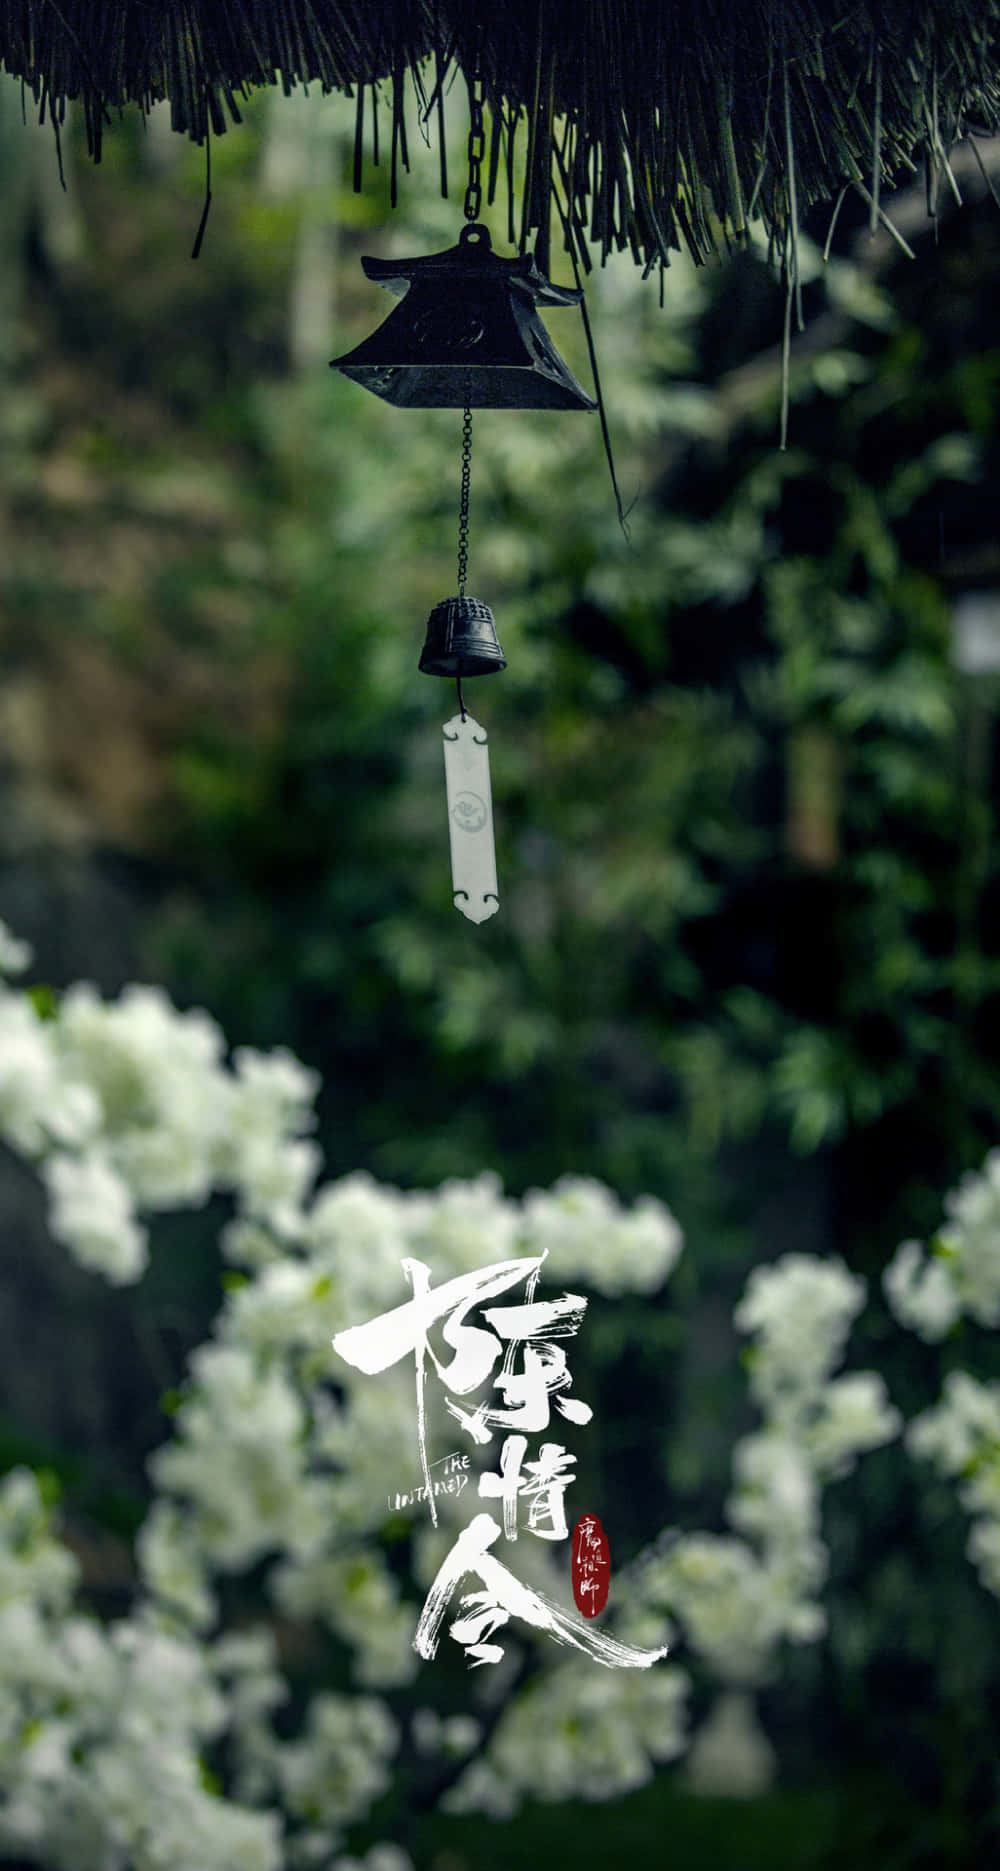 The Untamed Wind Chime Poster Wallpaper